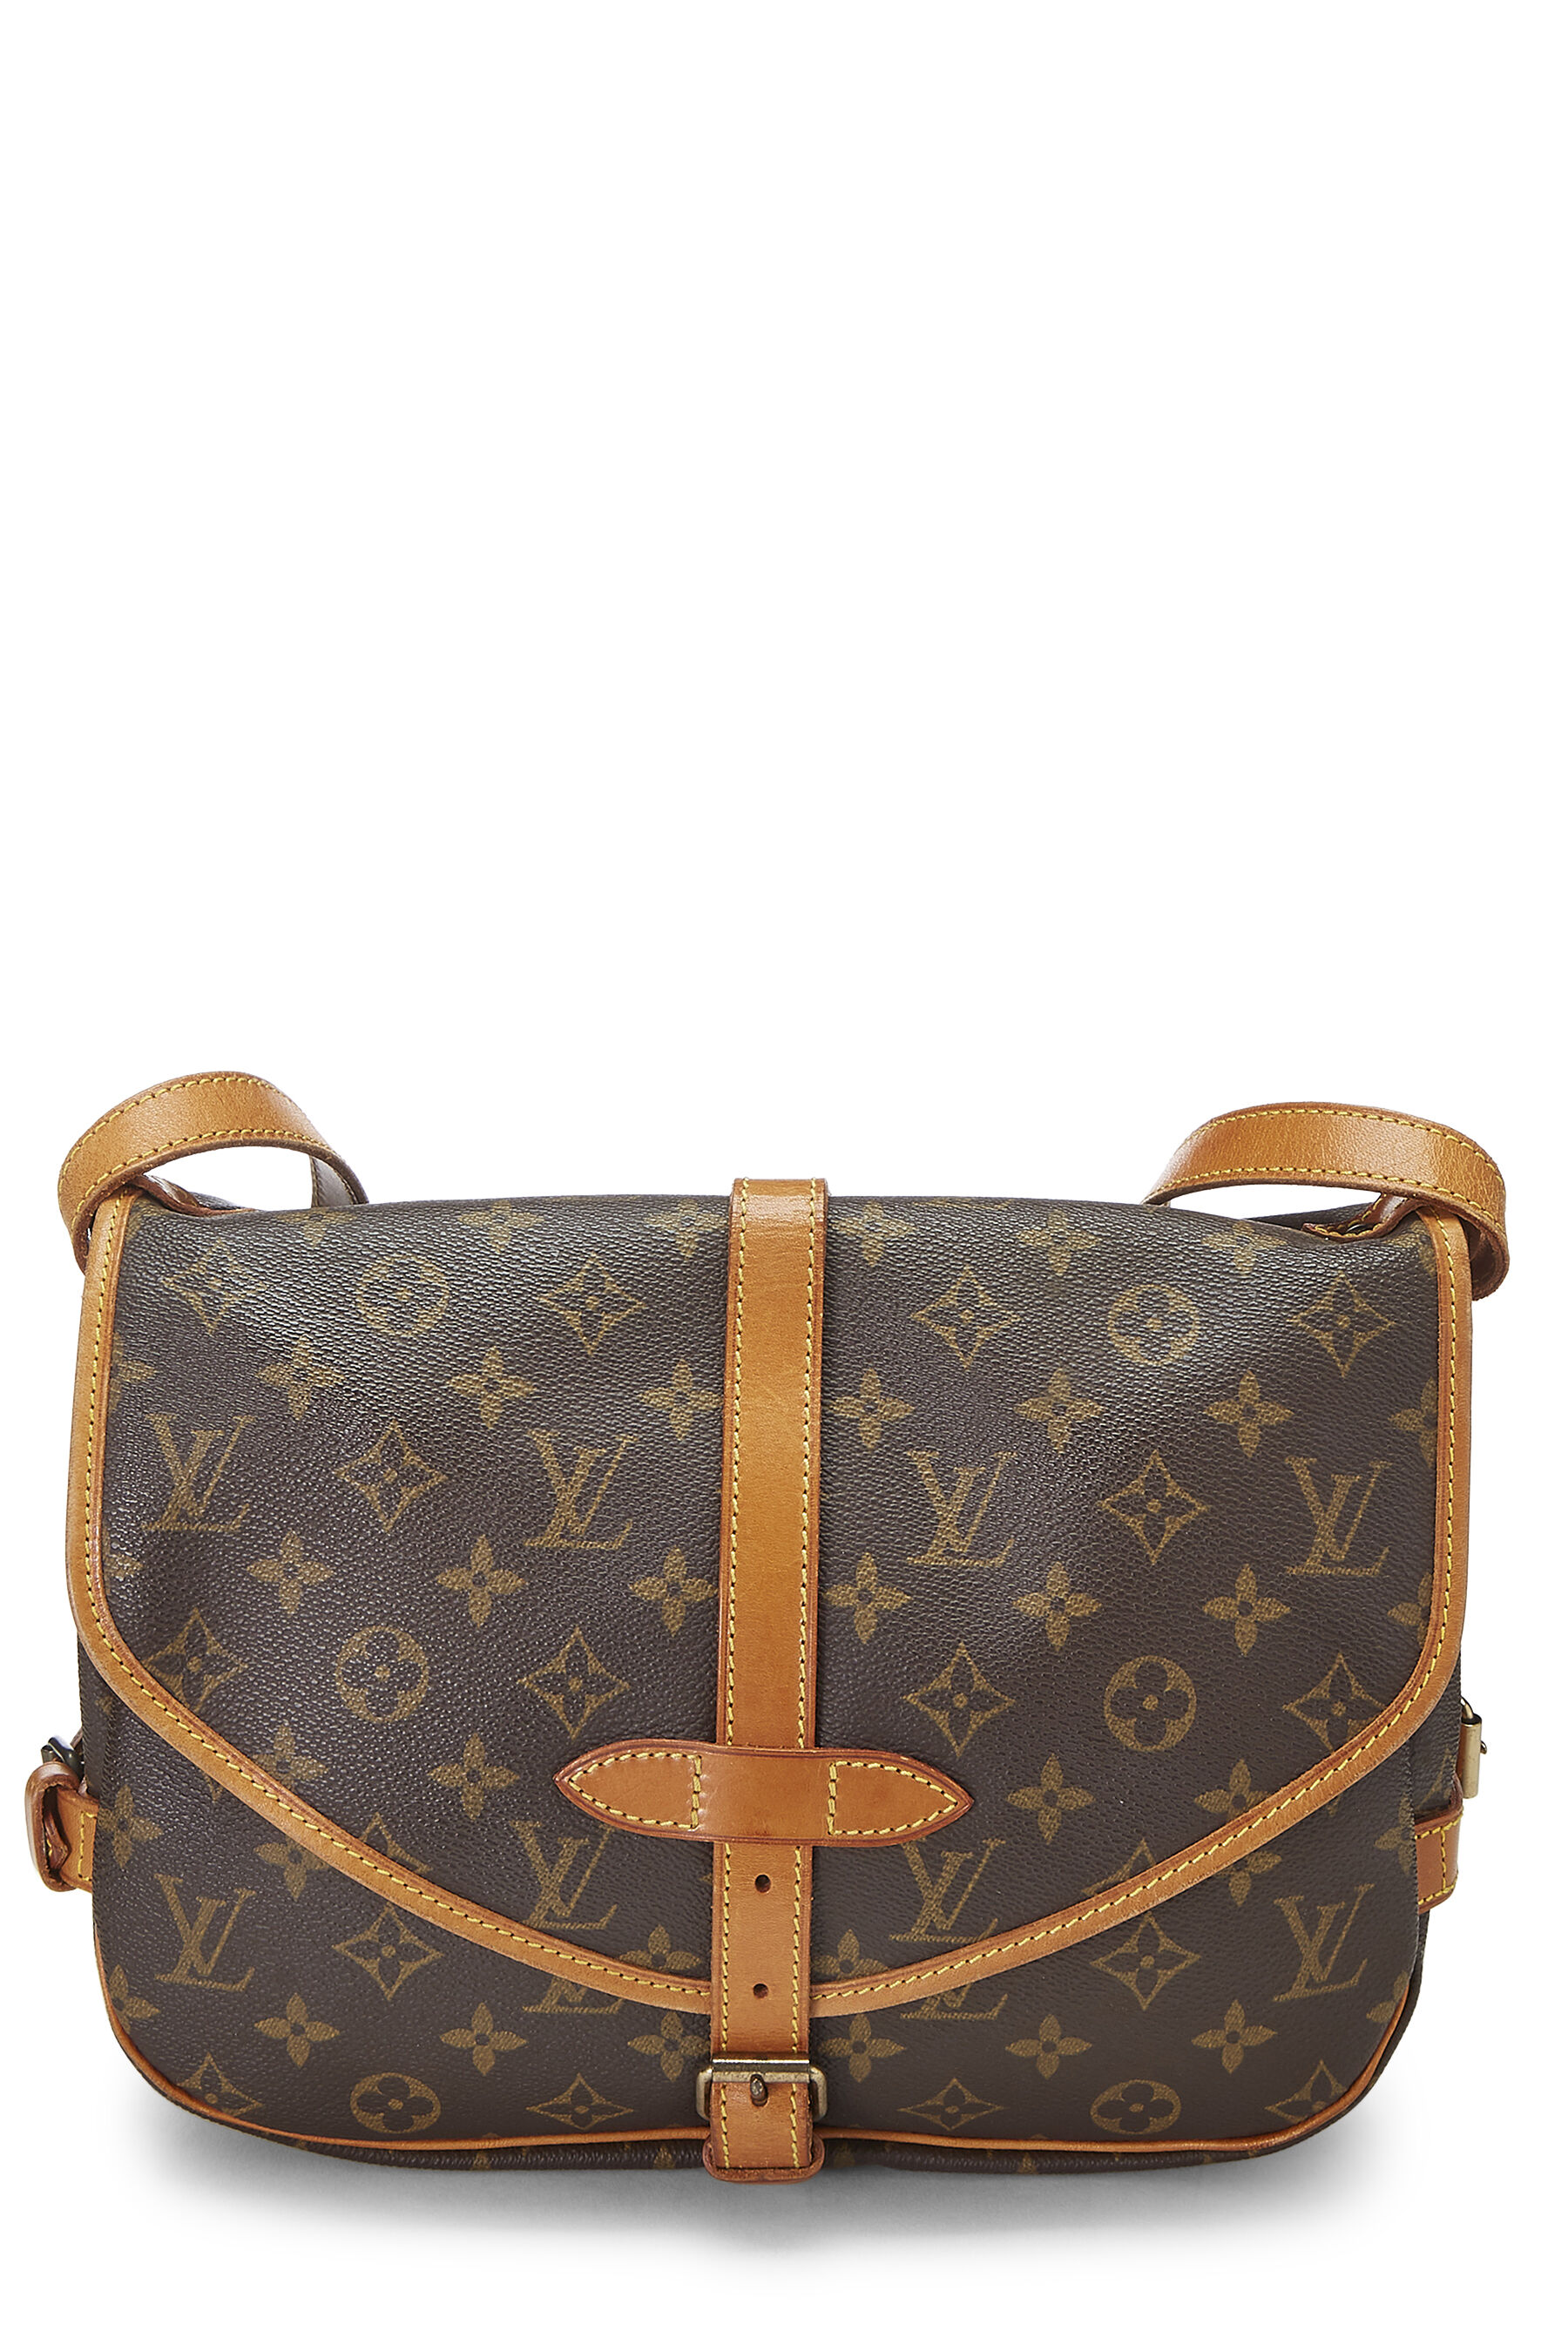 Louis Vuitton Limited Edition Perforated Monogram Canvas Saumur 30